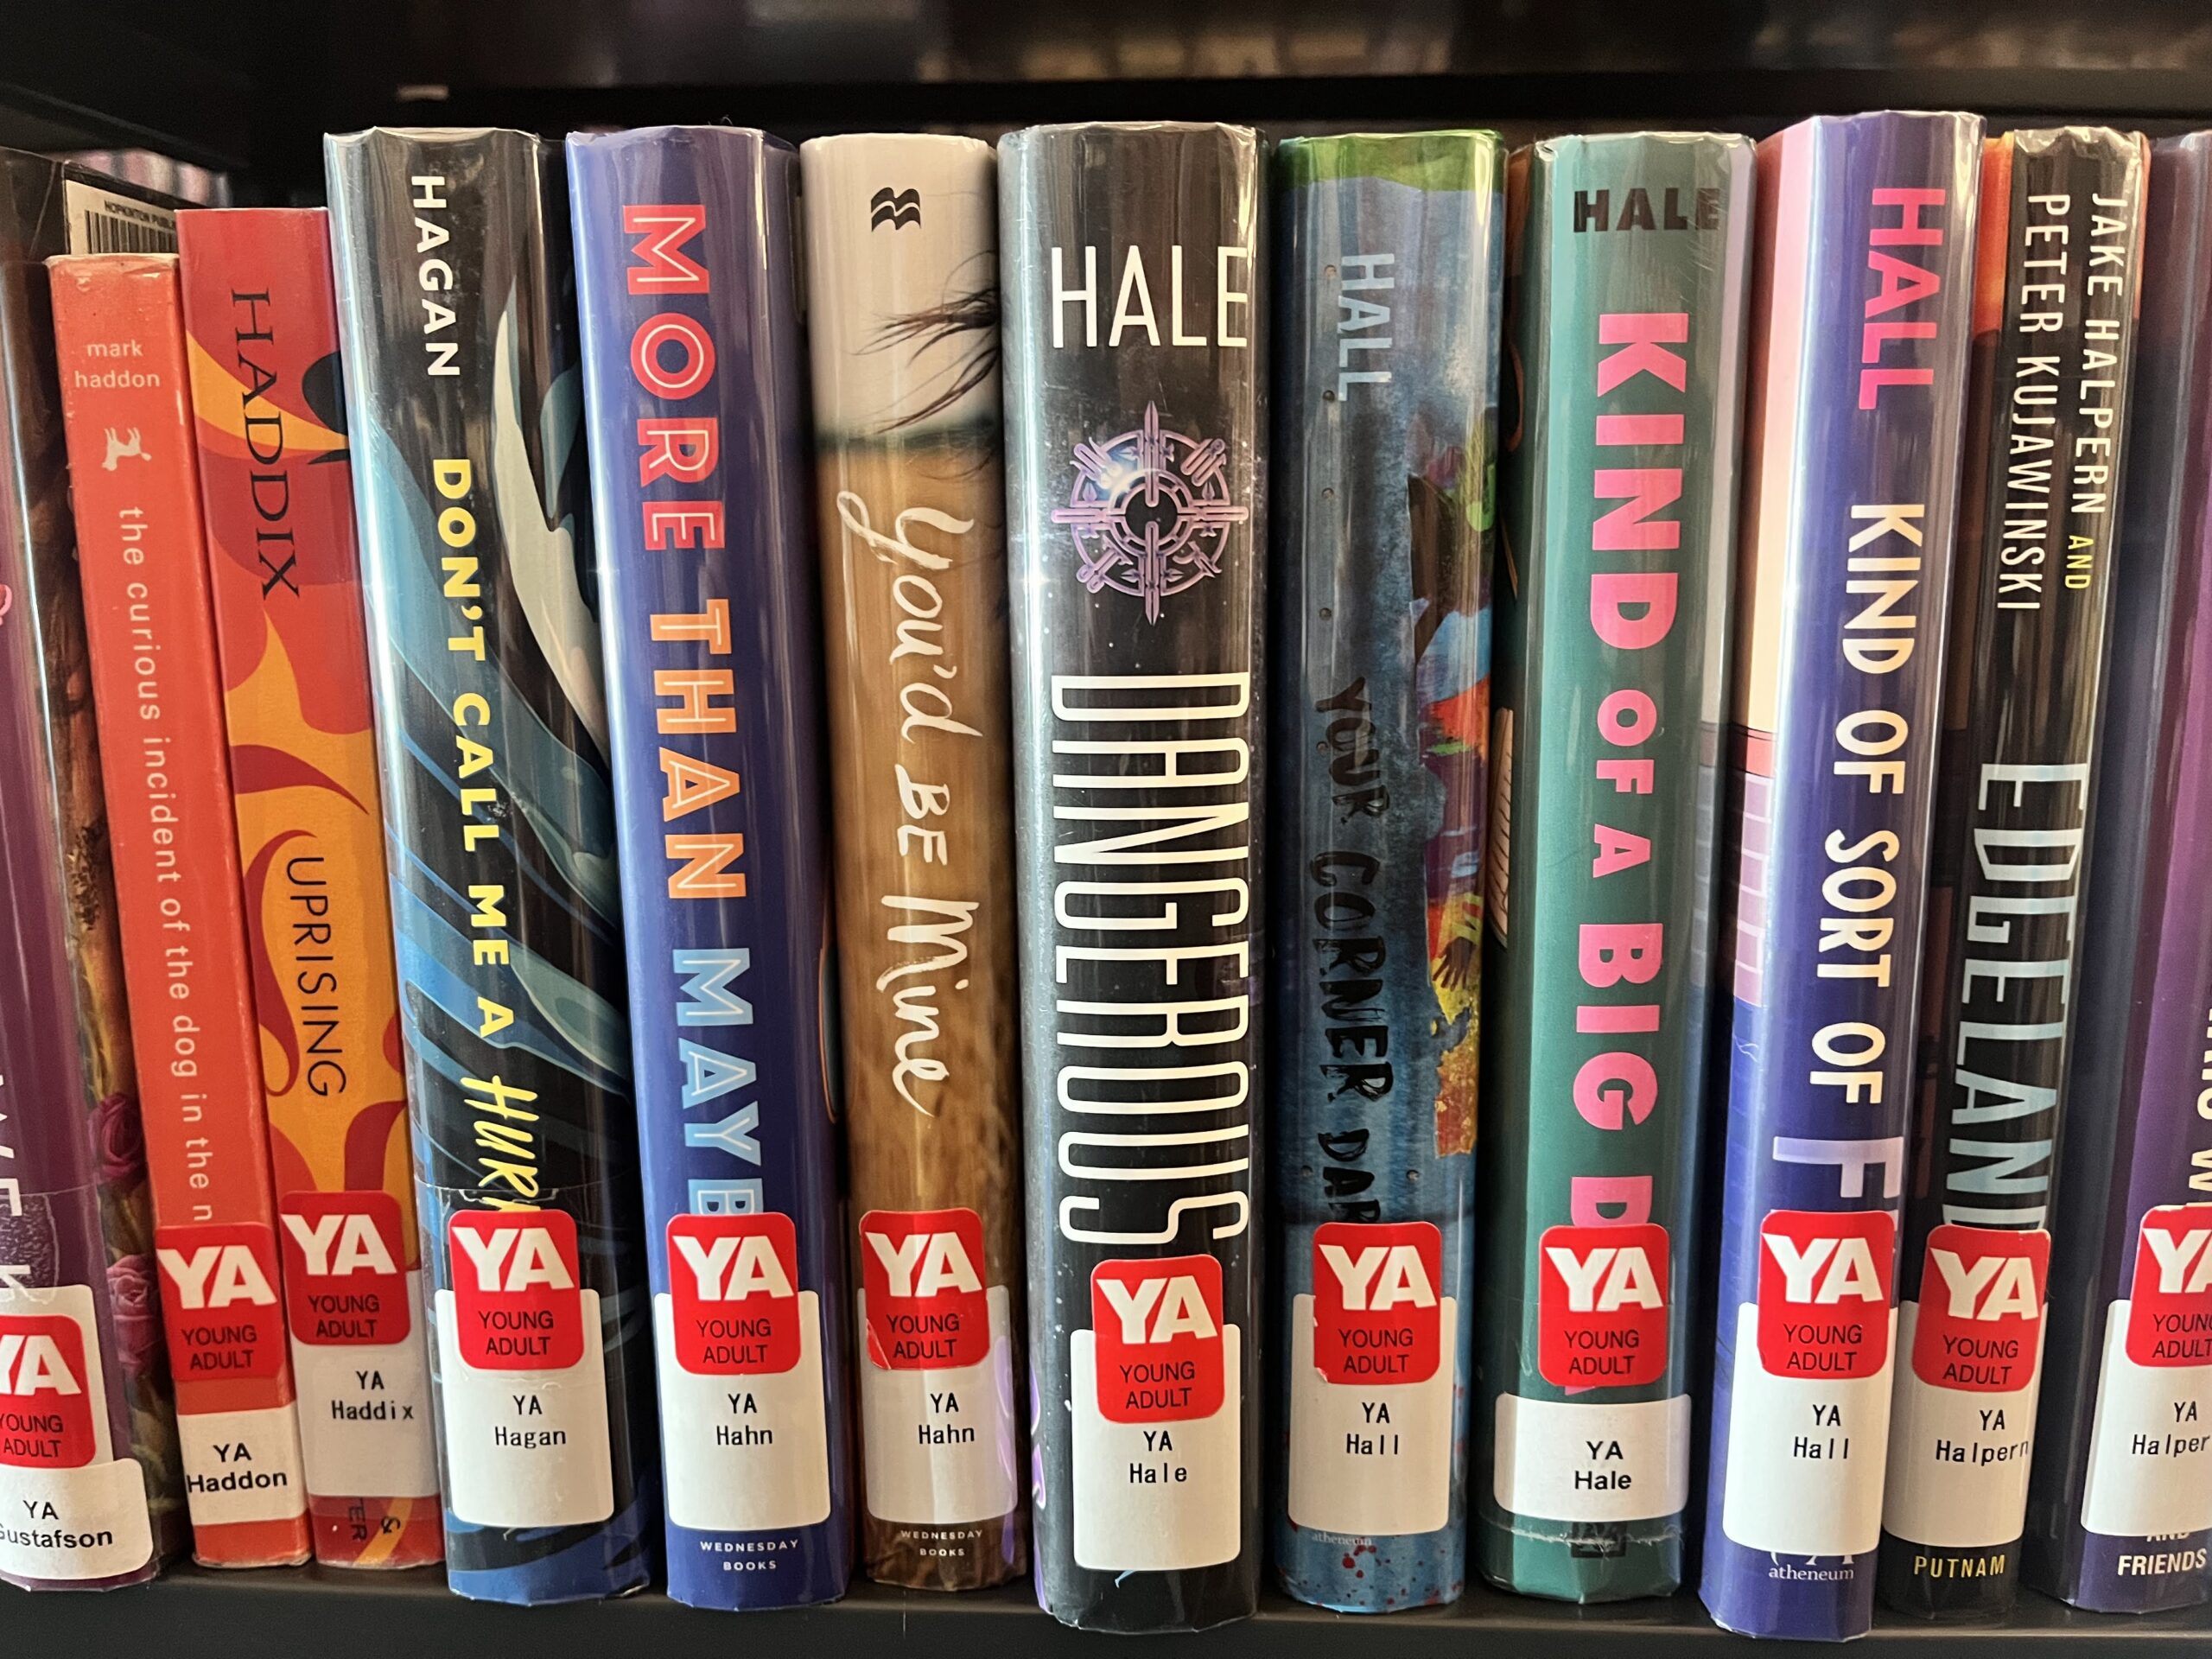  general Young adult books on a shelf in the collection.